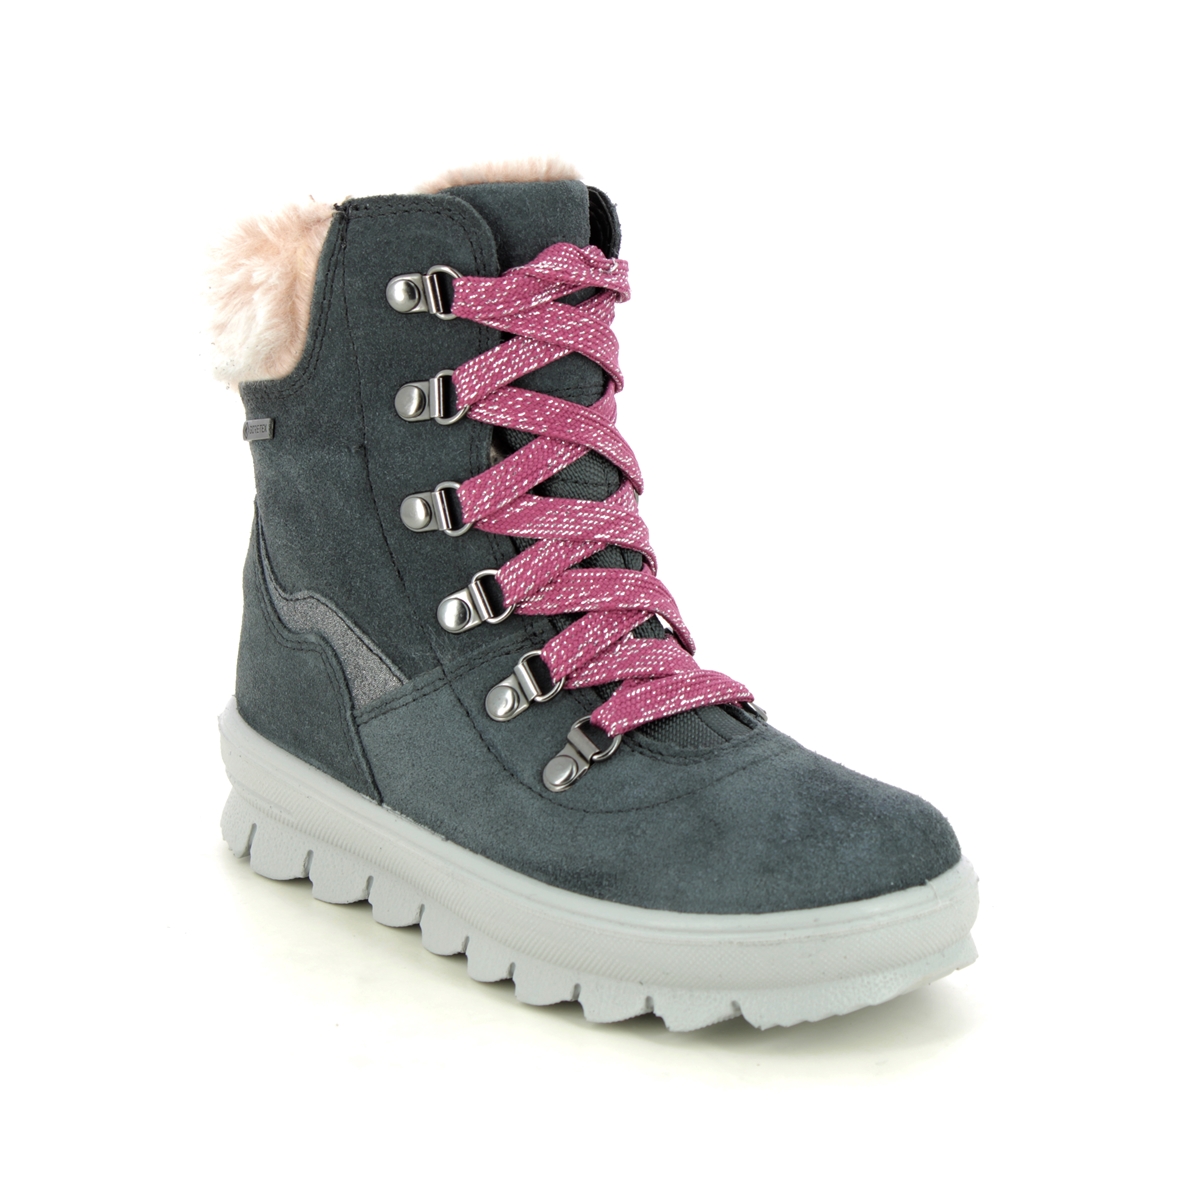 Superfit Flavia Lace Gtx Grey Suede Kids Girls Boots 1000220-2000 In Size 30 In Plain Grey Suede